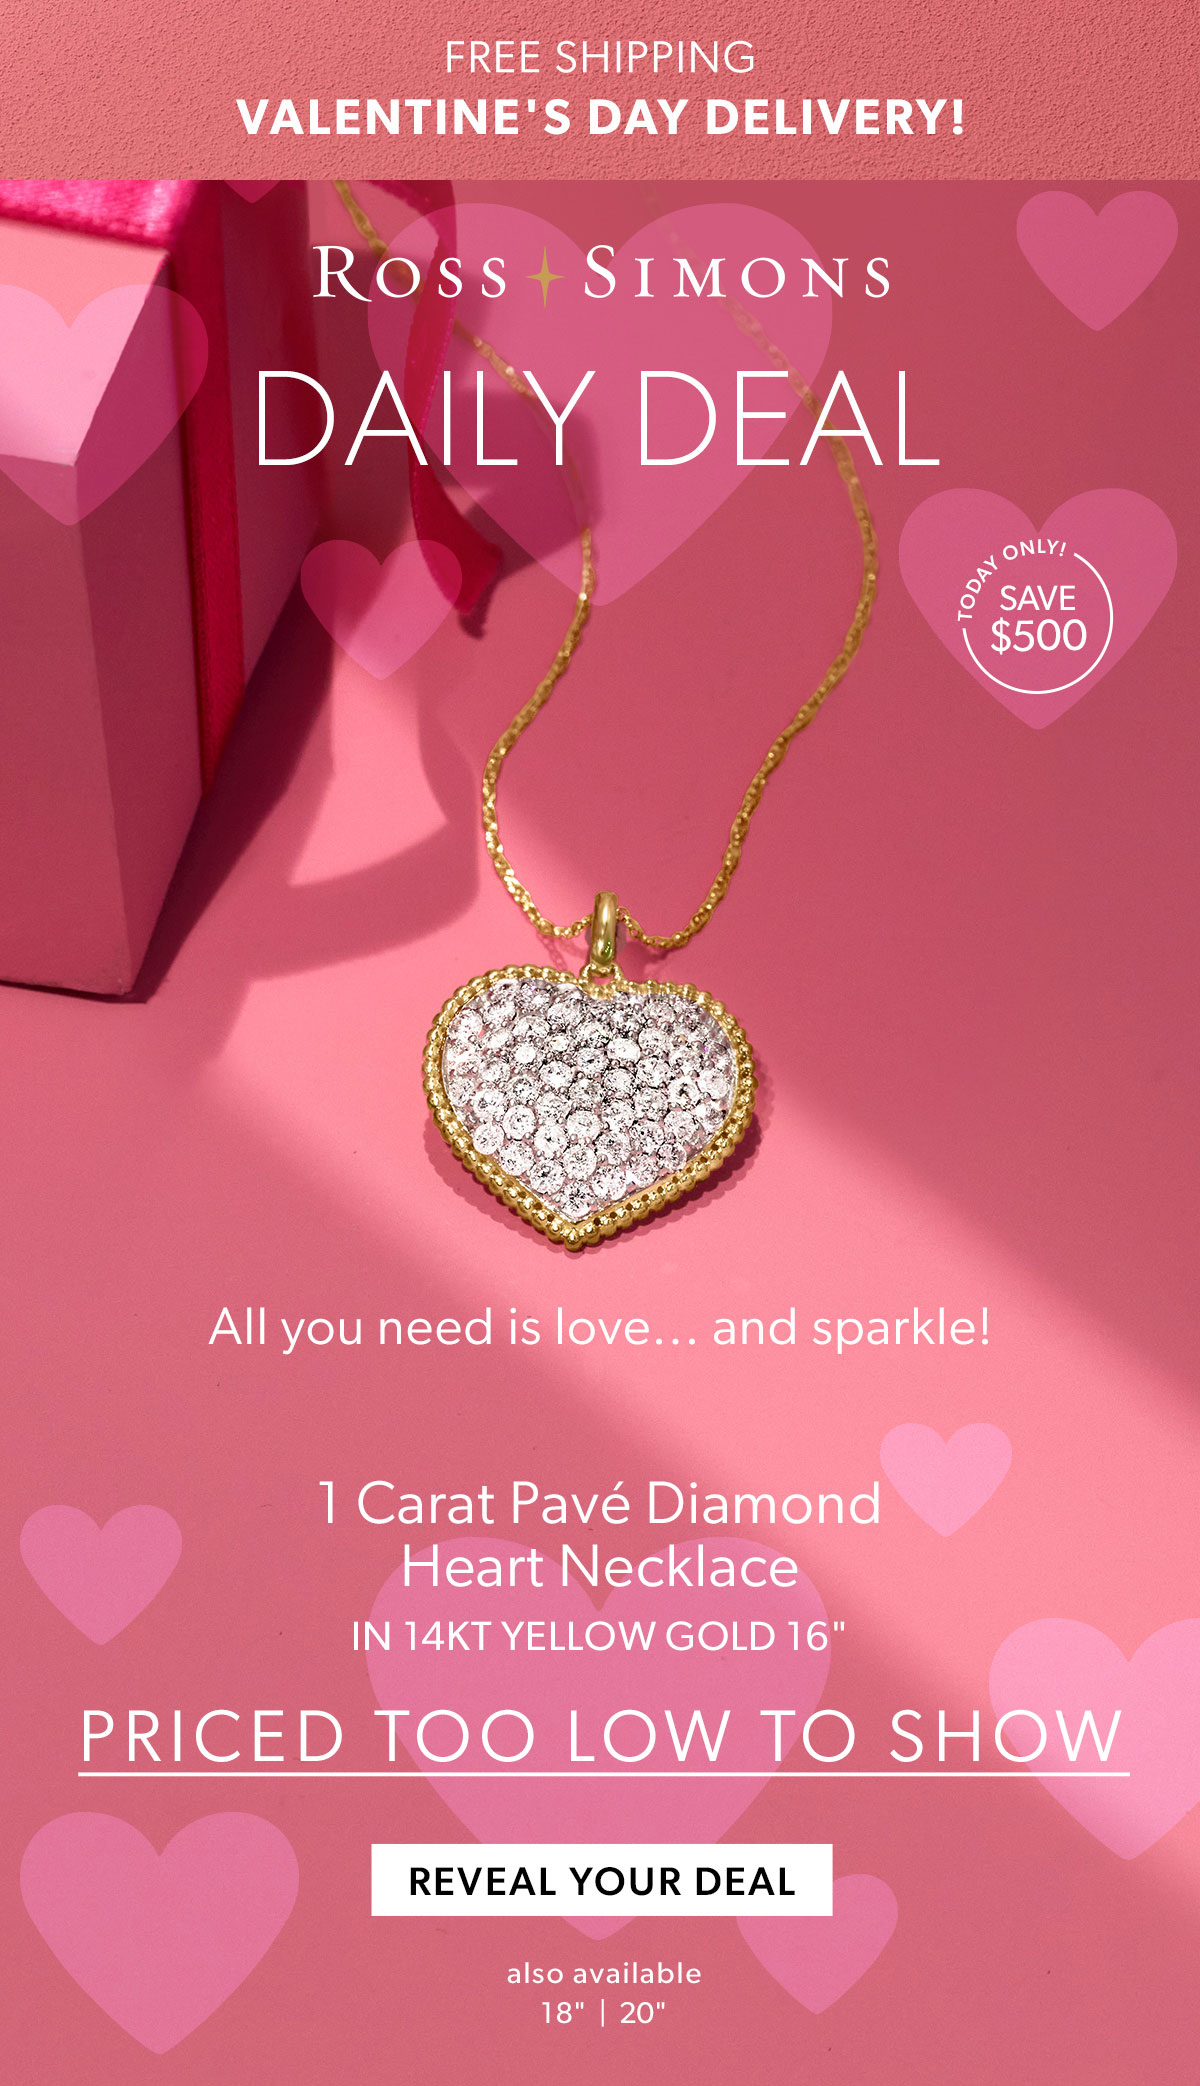 1 Carat Pave Diamond Heart Necklace. in 14kt Yellow Gold. Reveal Your Deal